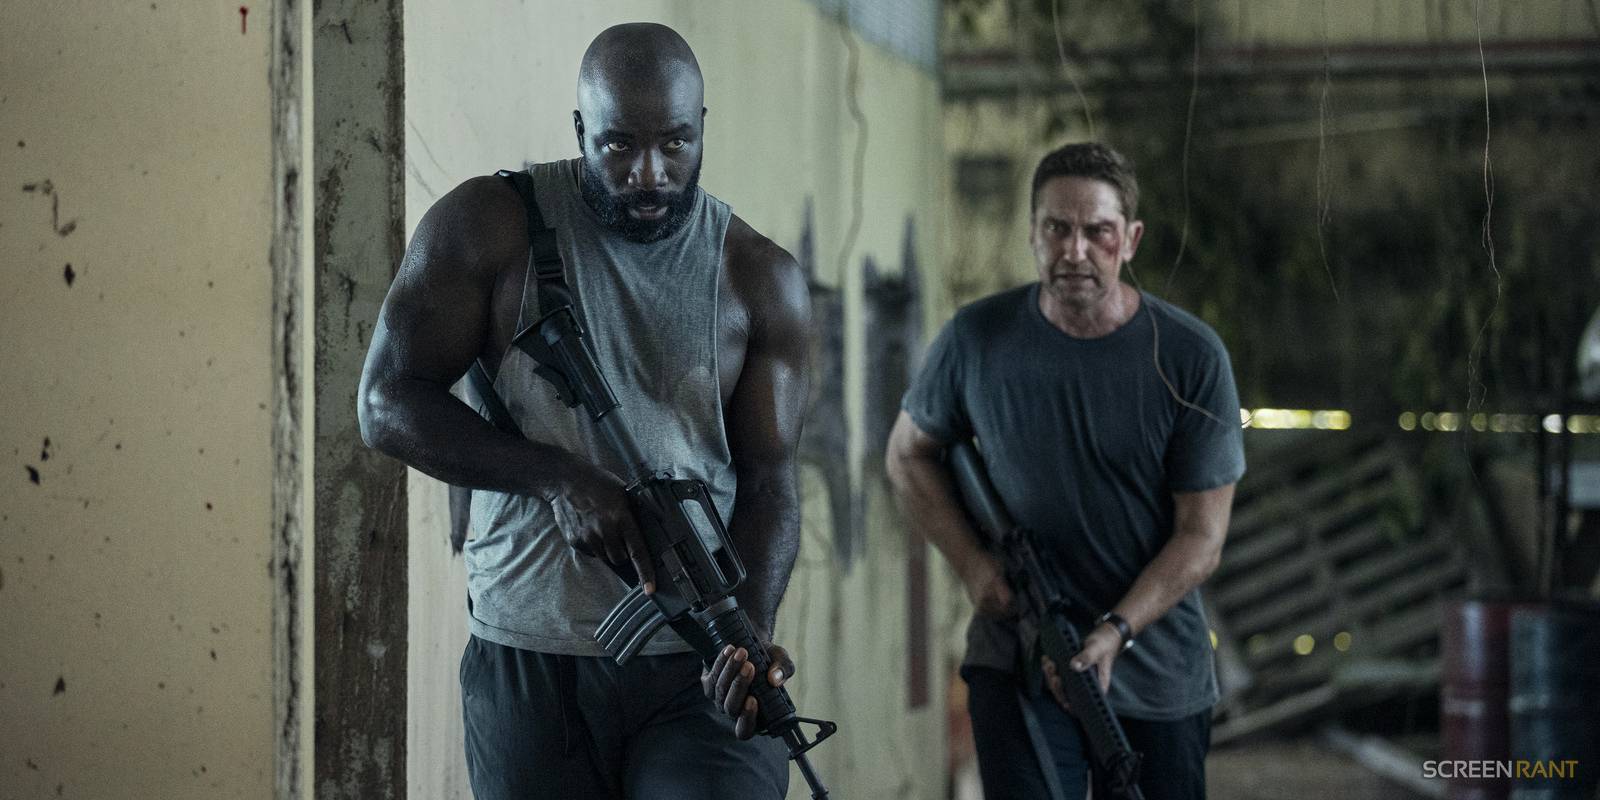 Plane Photo Sees Gerard Butler & Mike Colter In A Tough Spot [EXCLUSIVE]